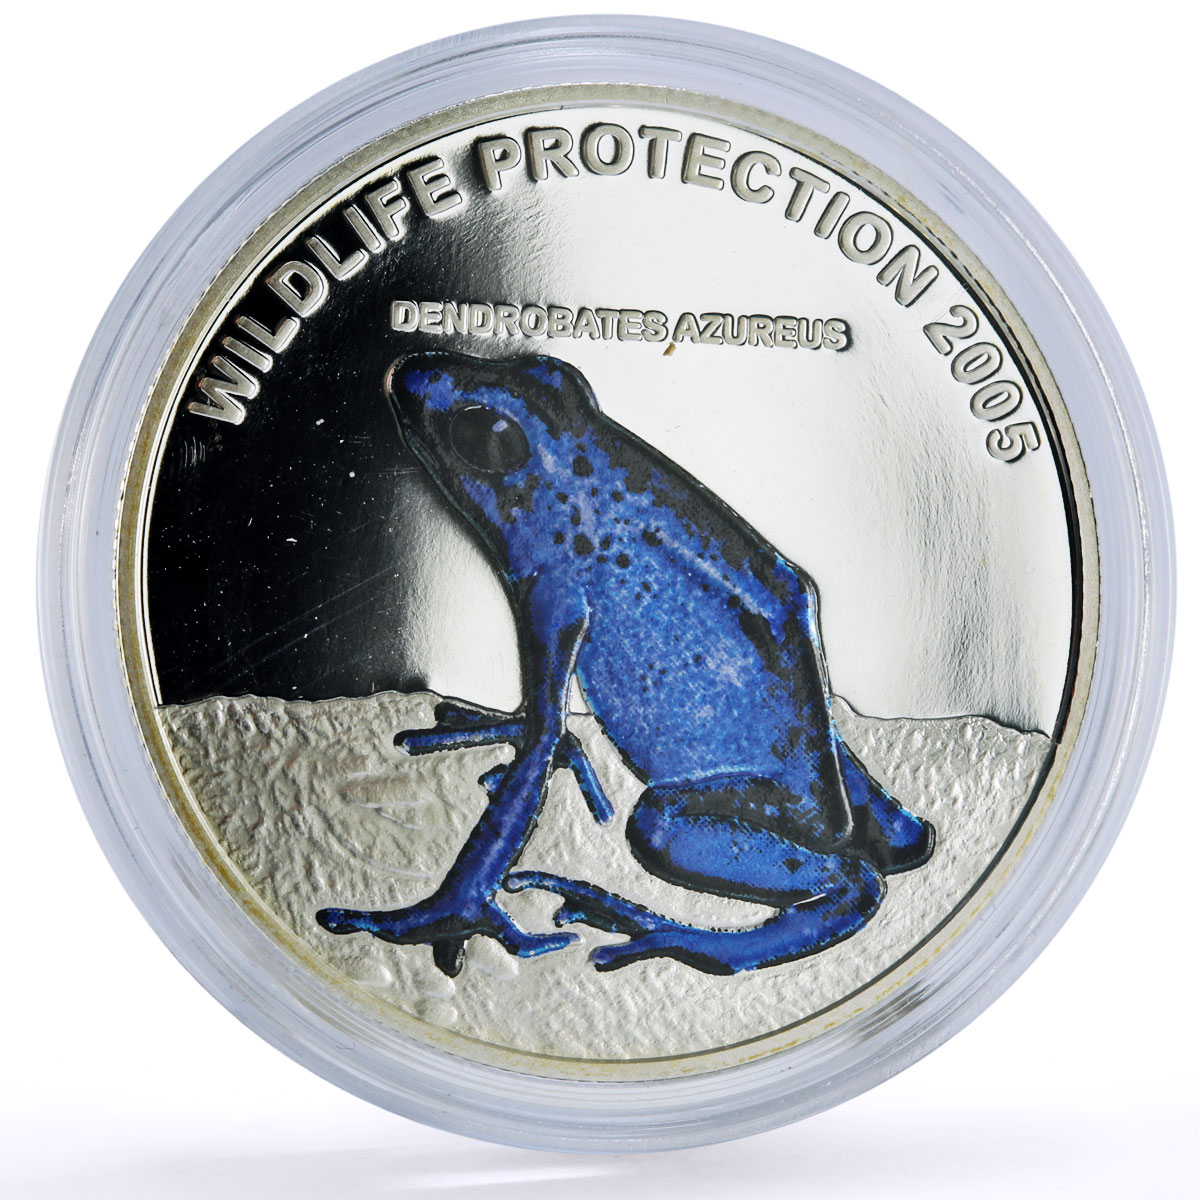 Liberia 20 dollars Protection Wildlife Blue Frog Fauna proof silver coin 2005